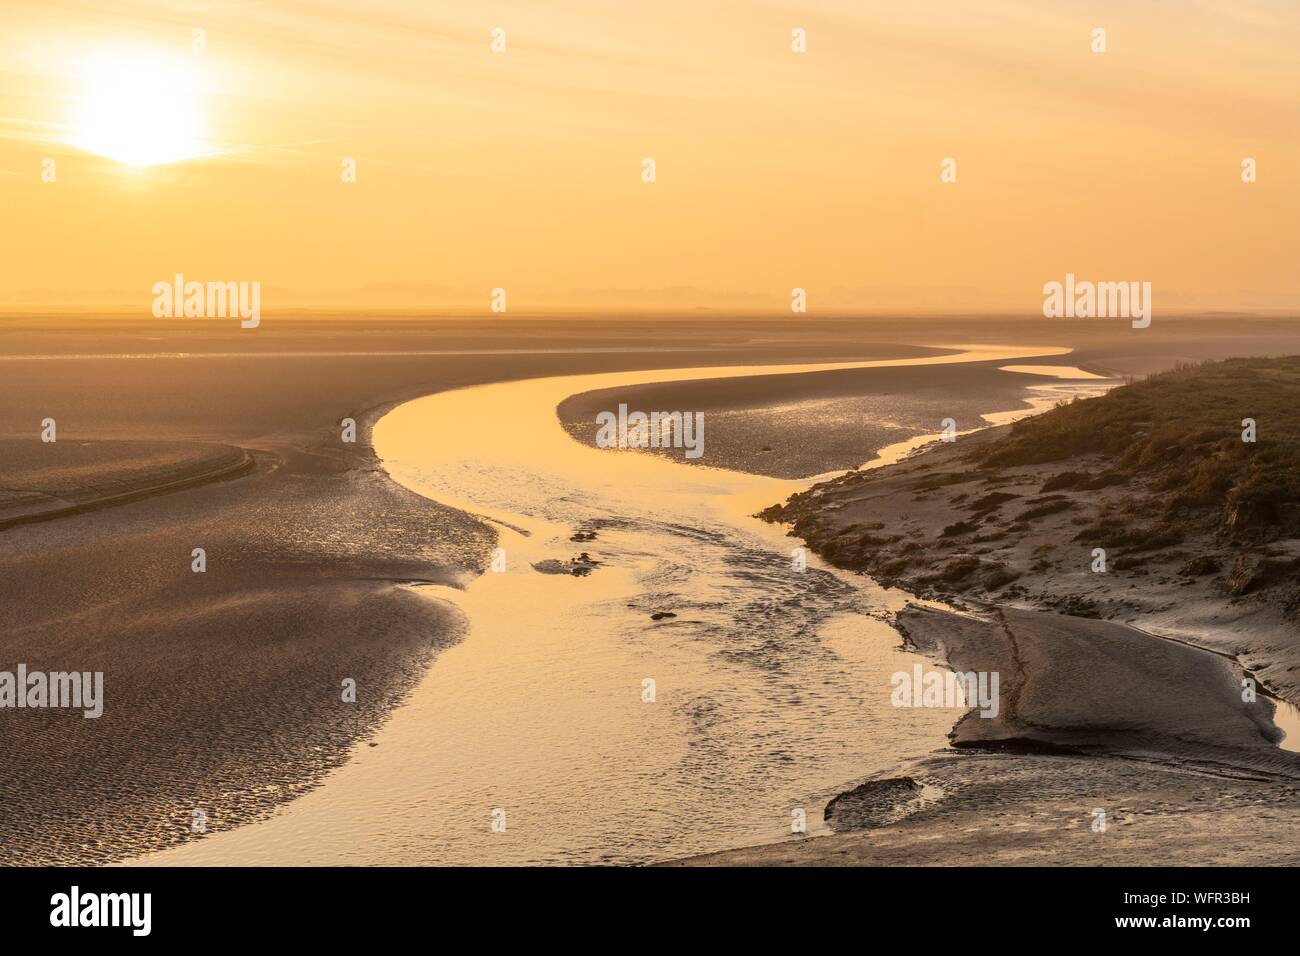 France, Somme, Baie de Somme, Saint Valery sur Somme, dawn on the Baie de Somme from the docks at low tide Stock Photo